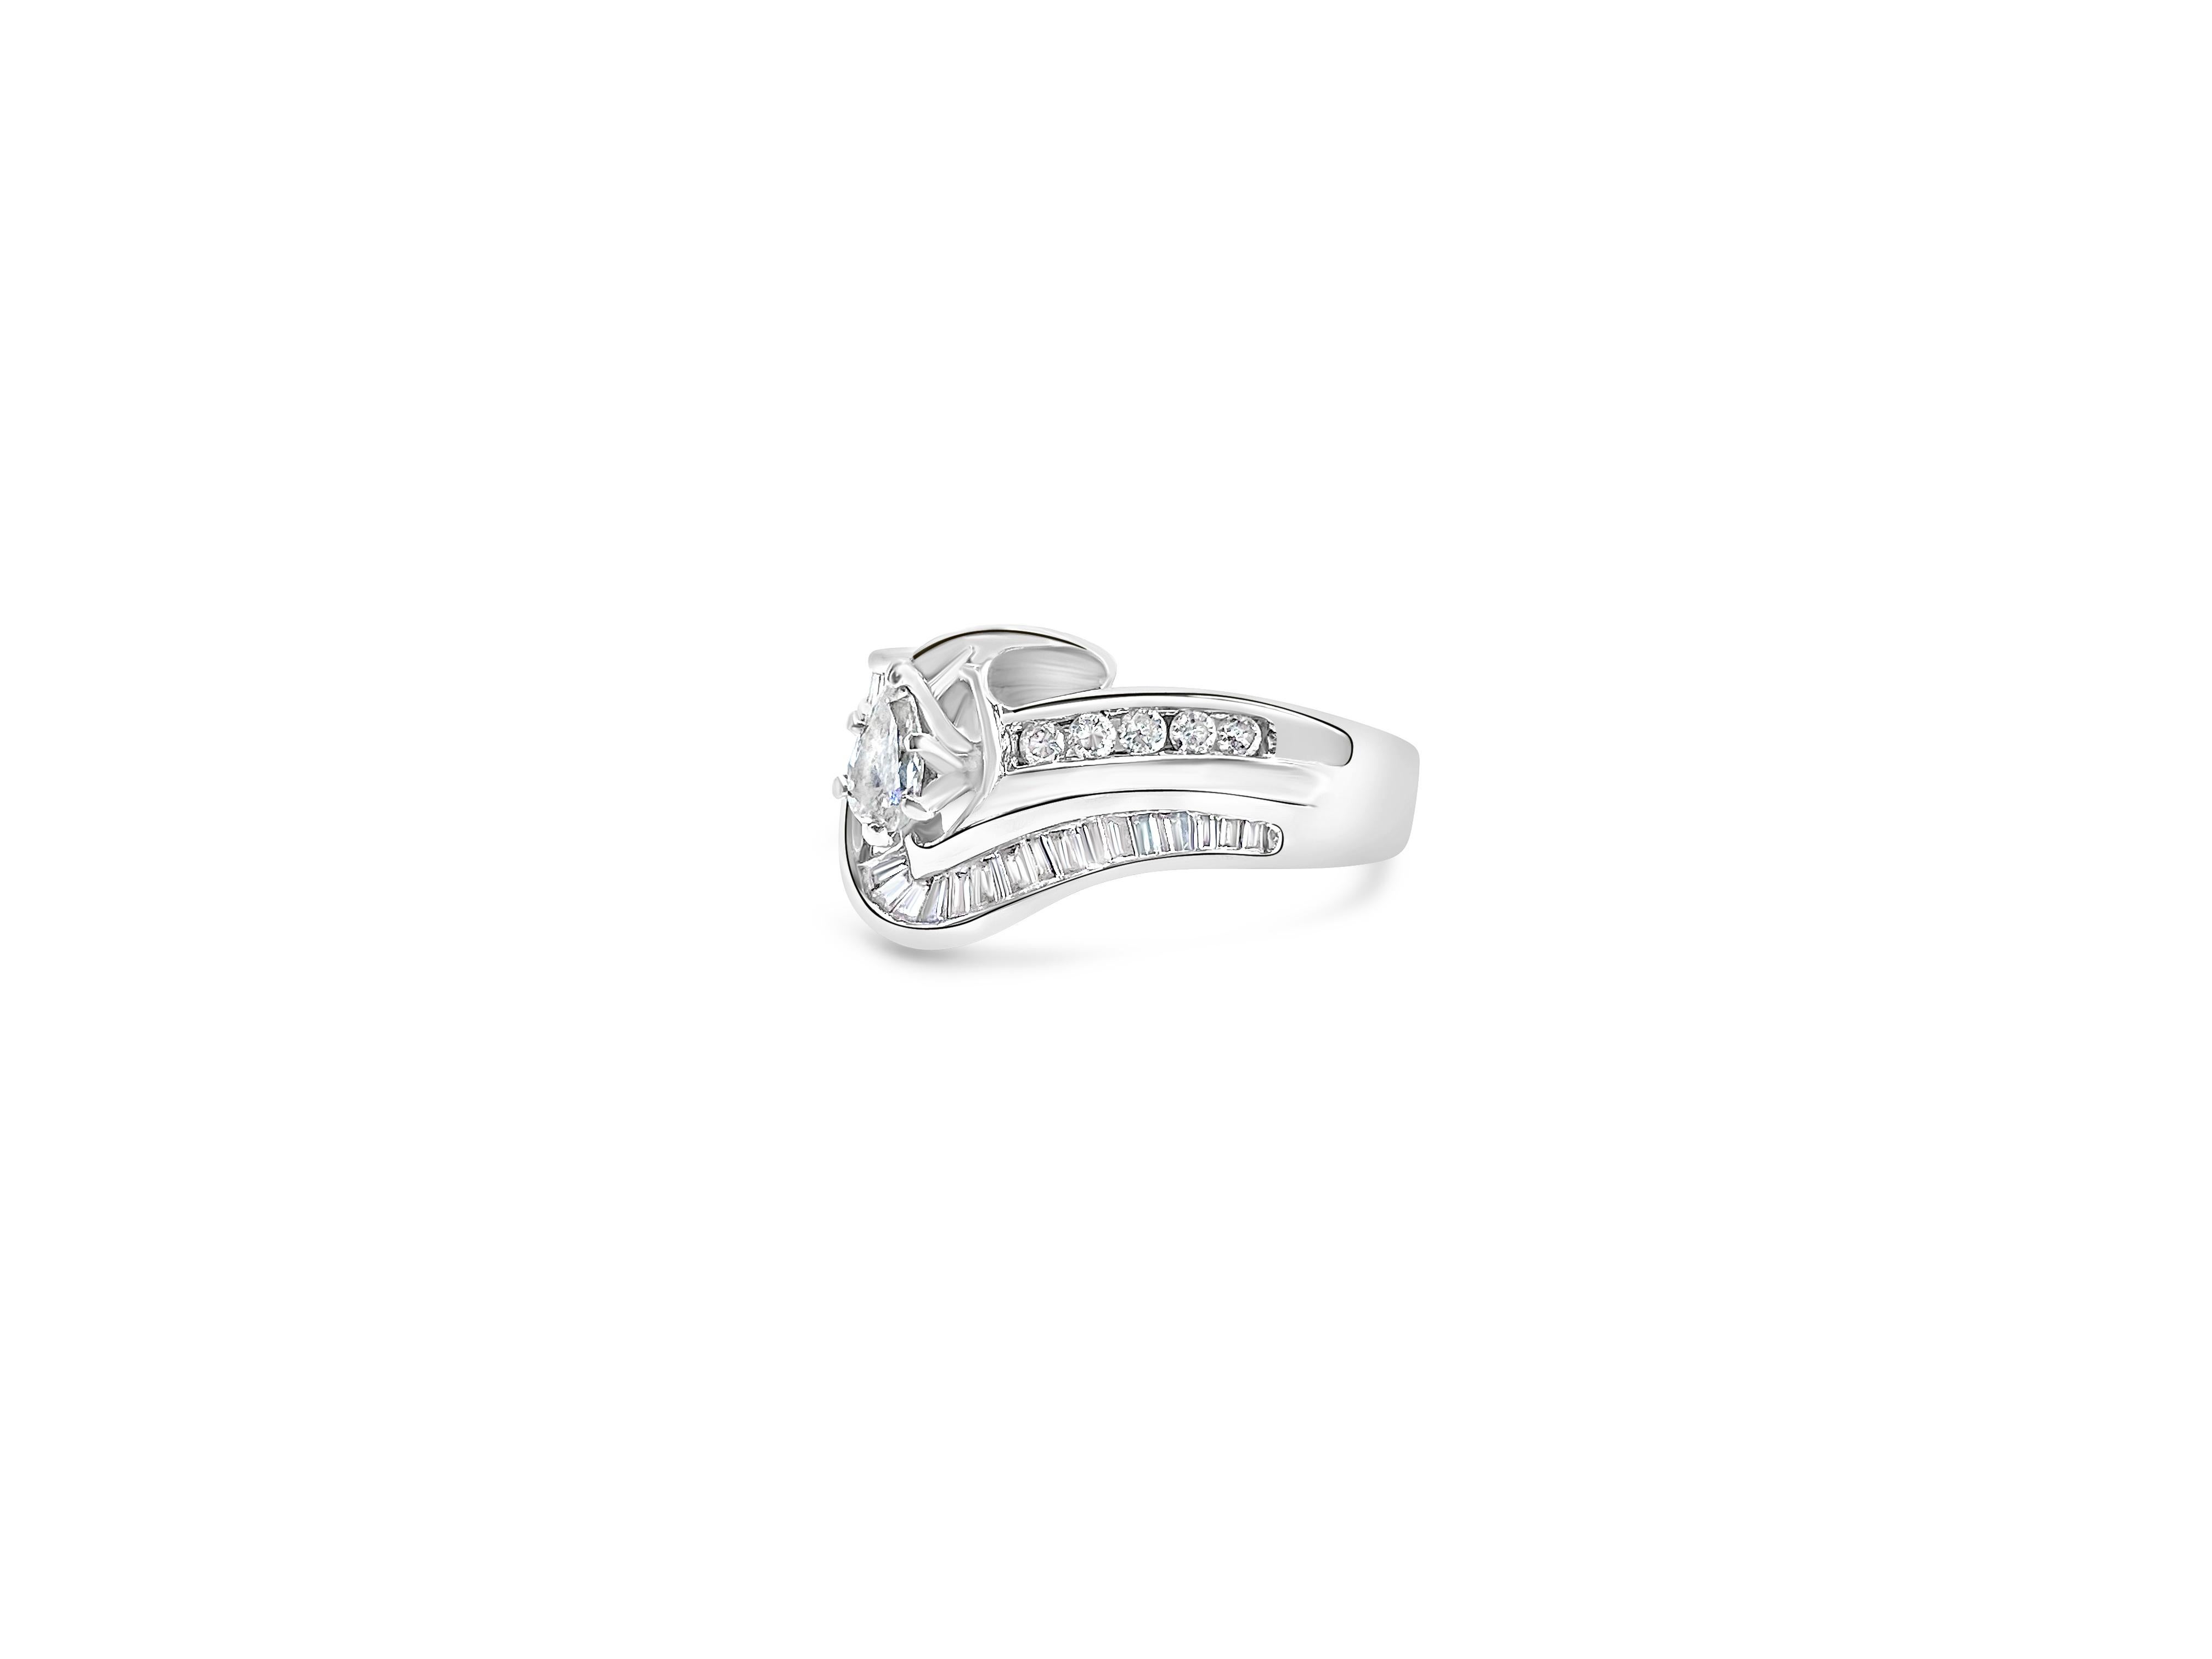 Crafted from 14k white gold, this elegant women's cluster diamond engagement ring showcases a total of 2.39 carats of round, pear, and baguette-cut diamonds. With SI1 clarity and G color, these natural earth-mined diamonds offer both brilliance and